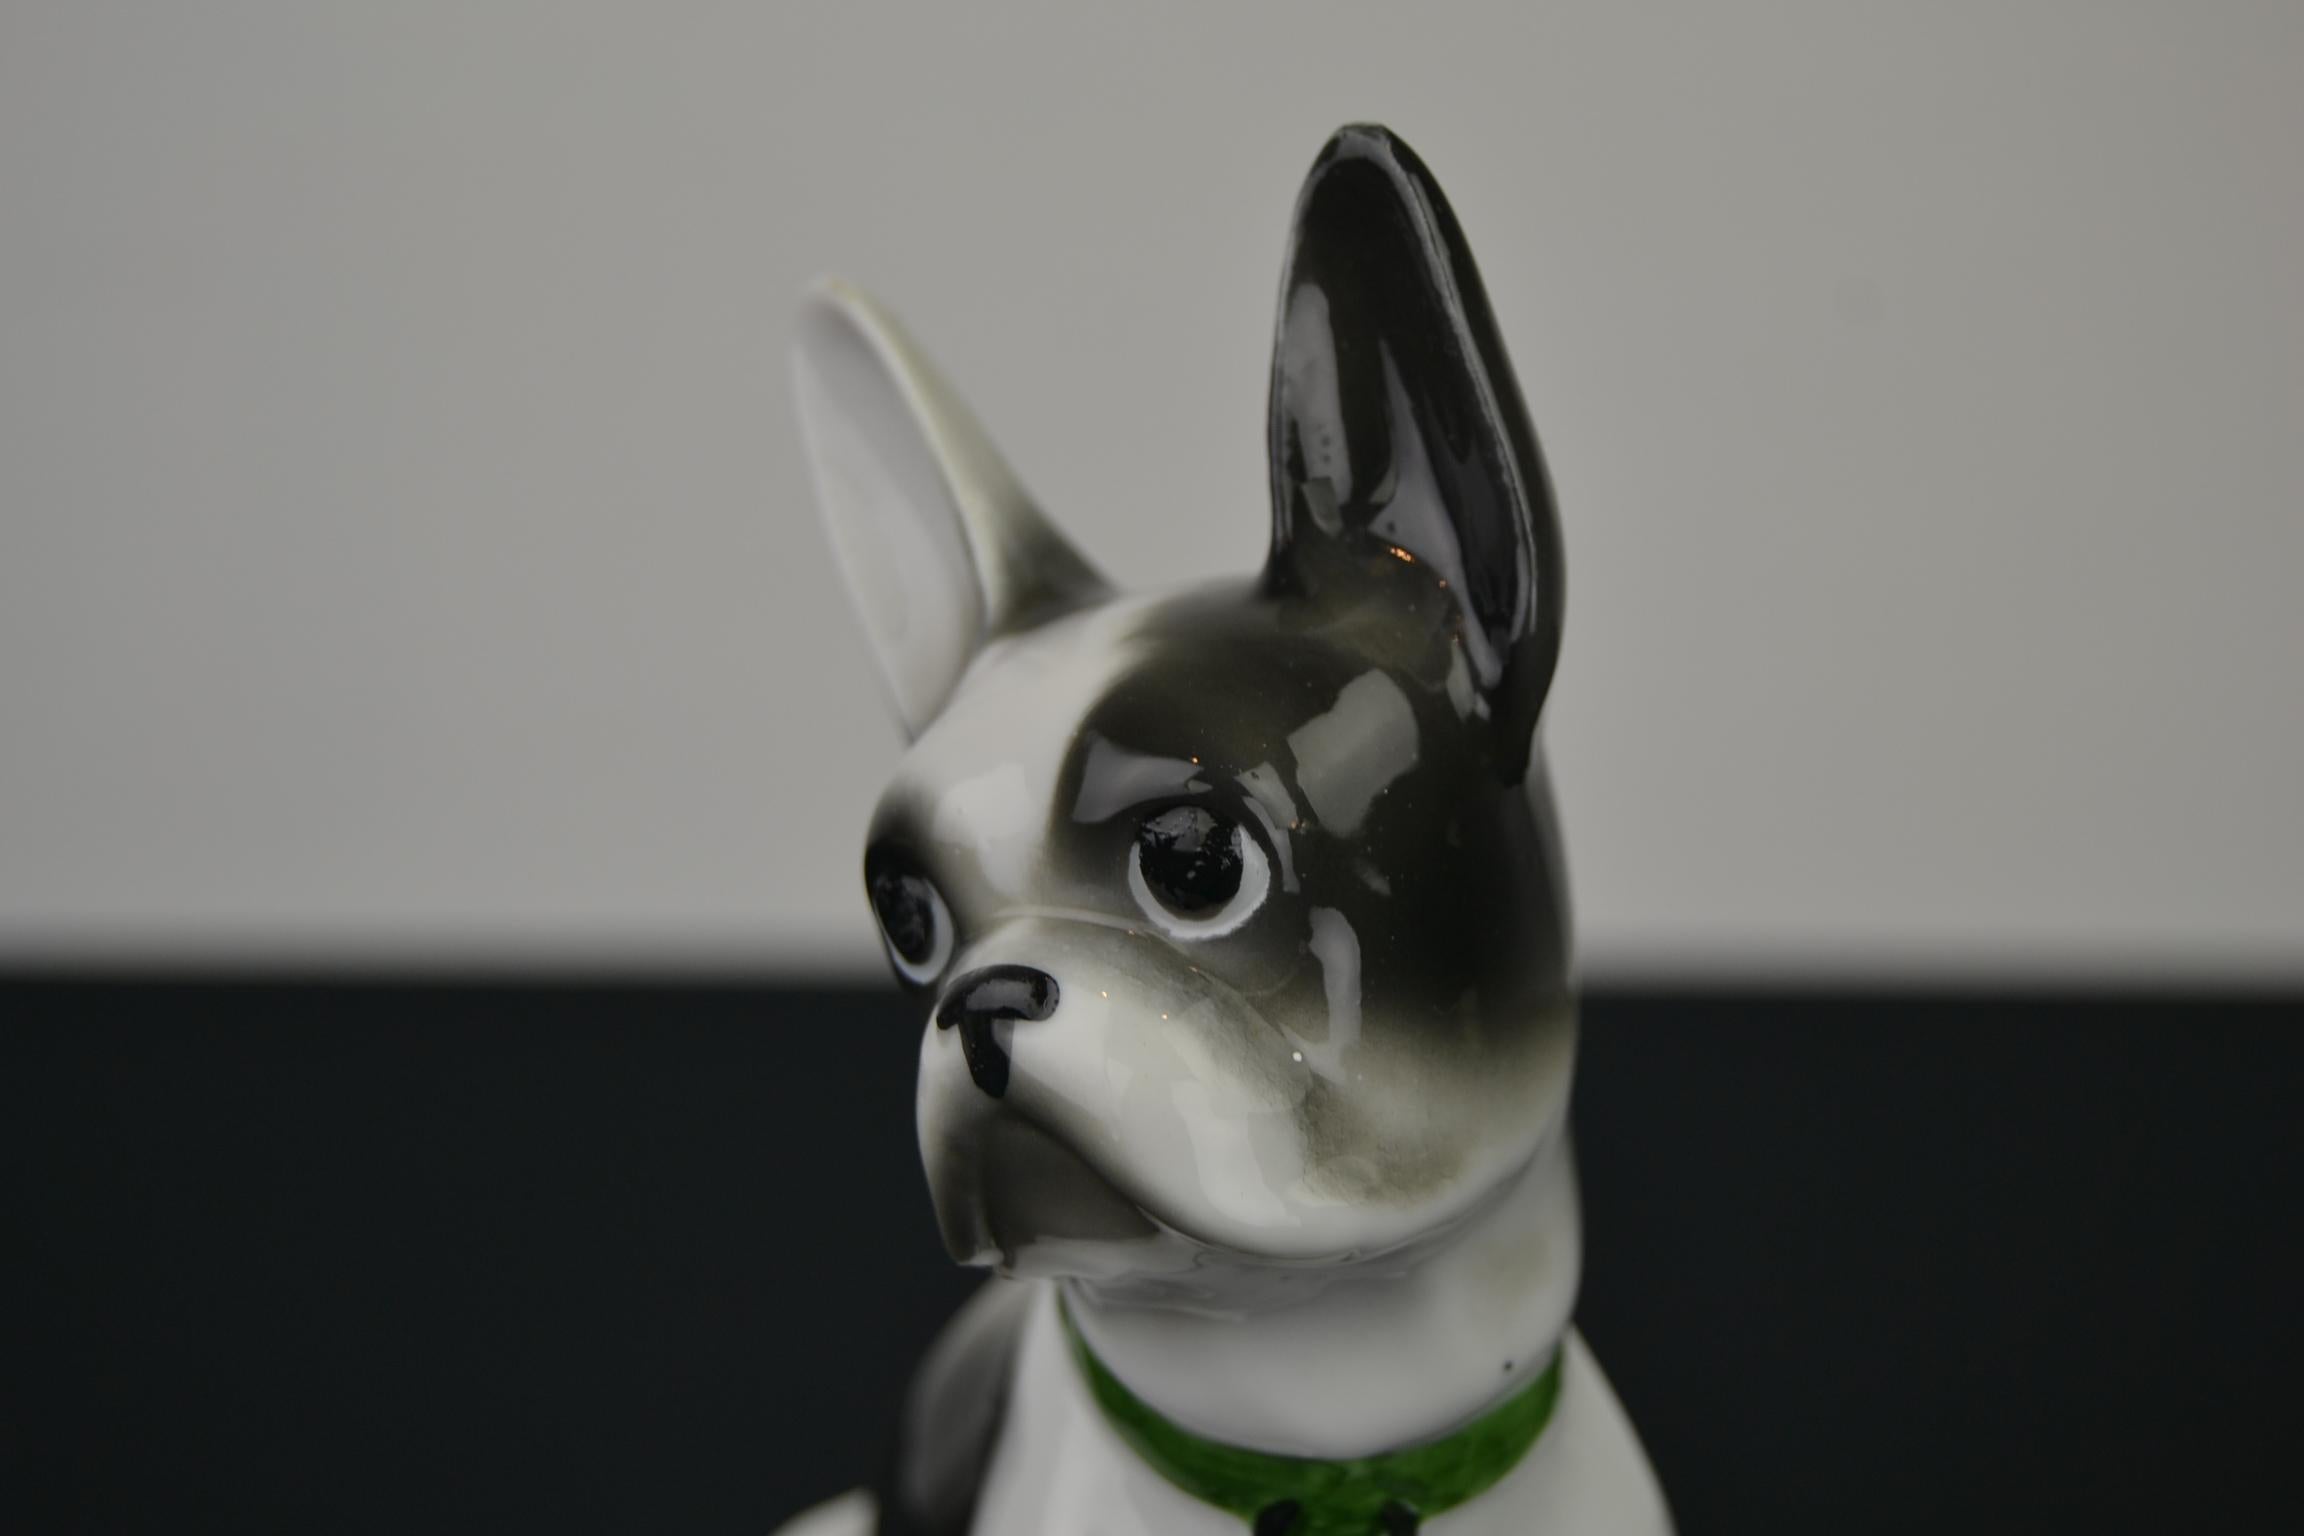 French bulldog sculpture or Boston terrier sculpture of porcelain.
It's a white with dark grey bulldog wearing a green collar.
A dog sculpture to add to your collection. 
He does not have chips, but does have some small fabric imperfections (